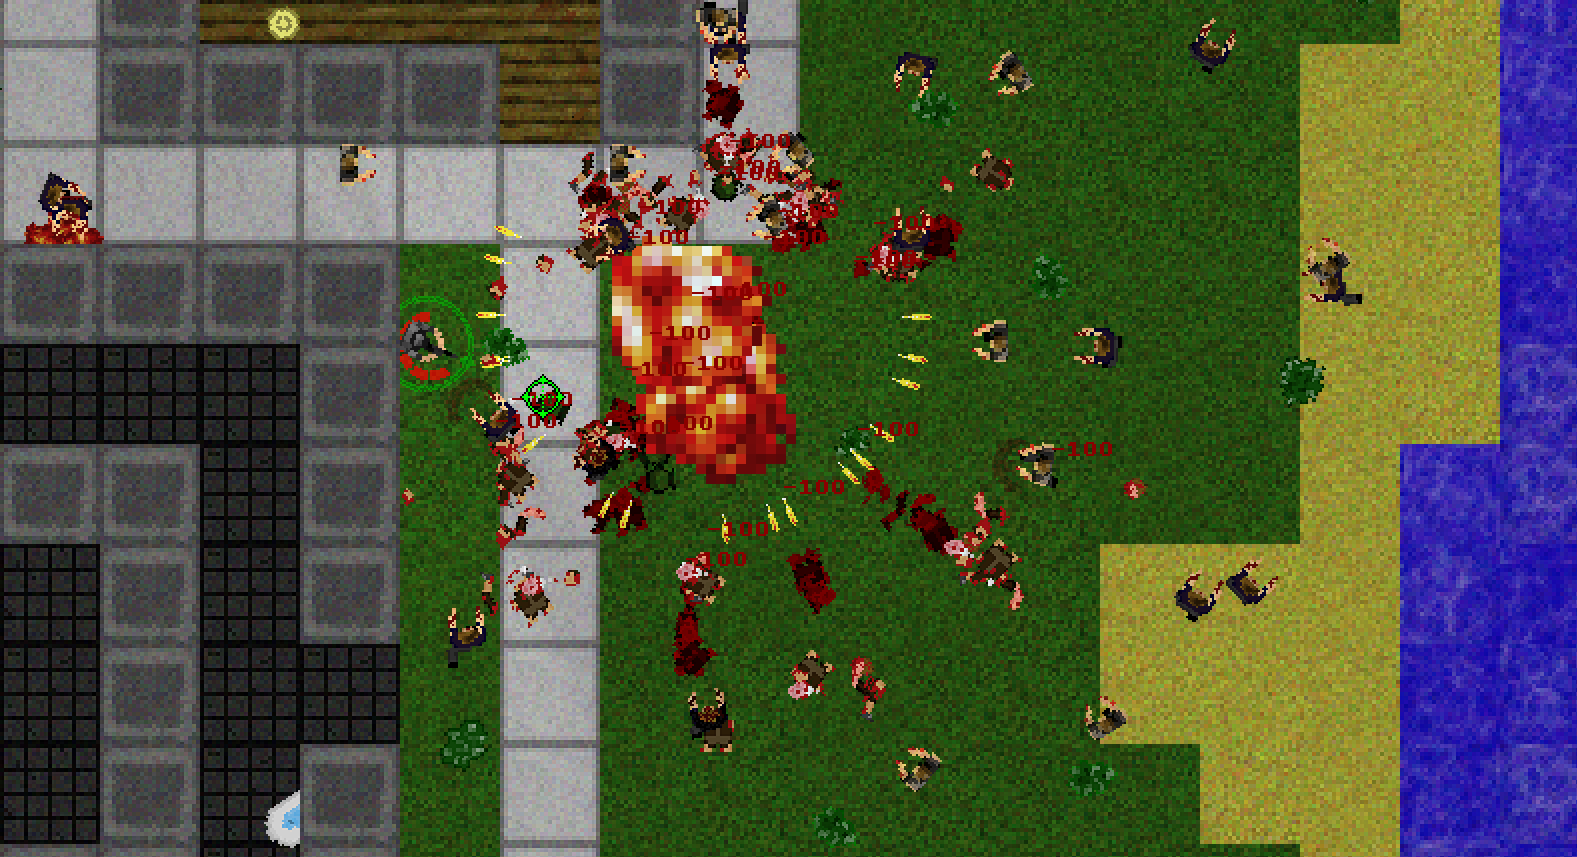 More Top Down Zombie Killing Chaos! image - Over 9000 Zombies!